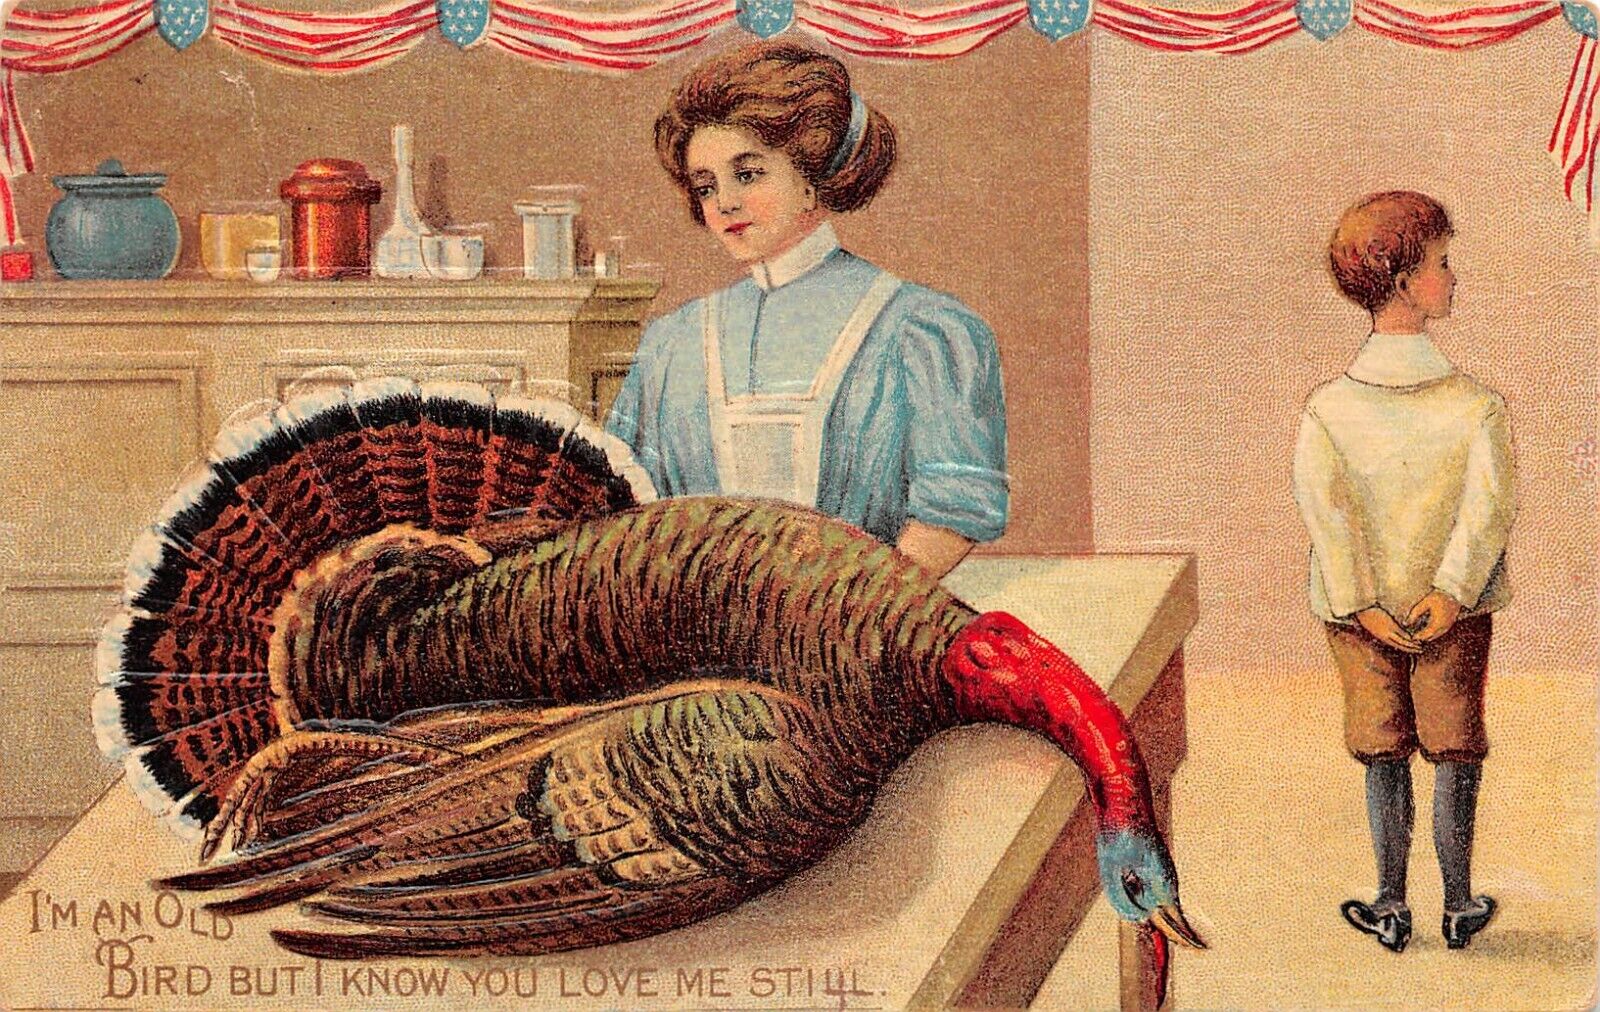 UPICK POSTCARD THANKSGIVING I'm An Old Bird But I Know You Love Me Still 1910